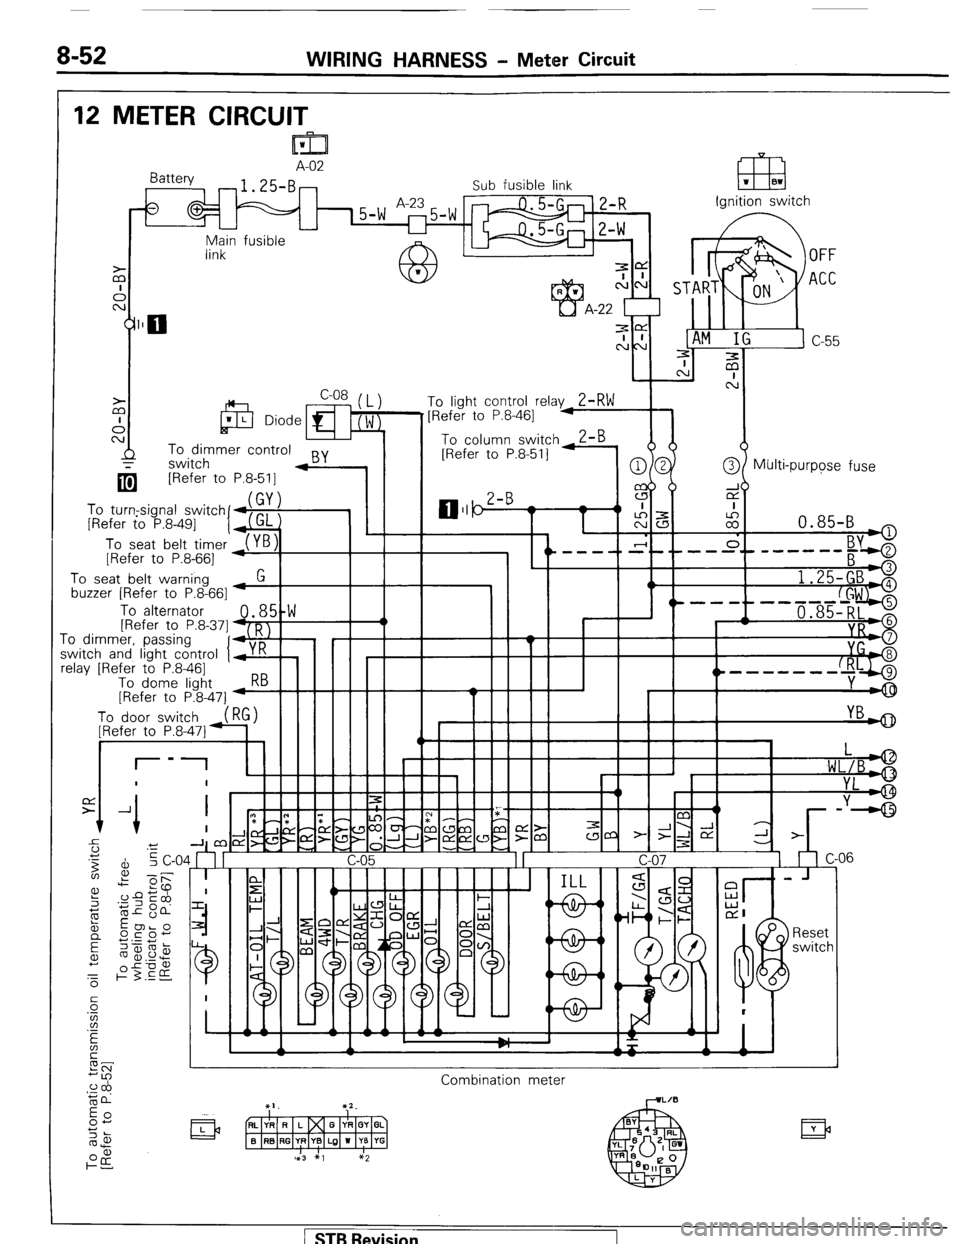 MITSUBISHI MONTERO 1987 1.G Workshop Manual WIRING HARNESS - Meter Circuit 
12 METER CIRCUIT 
m 1 A-02 
Sub fusible link 
15-w Ignition switch 
Main fusible -  
-- 
link 
A-22 
‘1 
m -ffiFirmer control BY 
4 
[Refer to P.8-511 
I I 0 column :